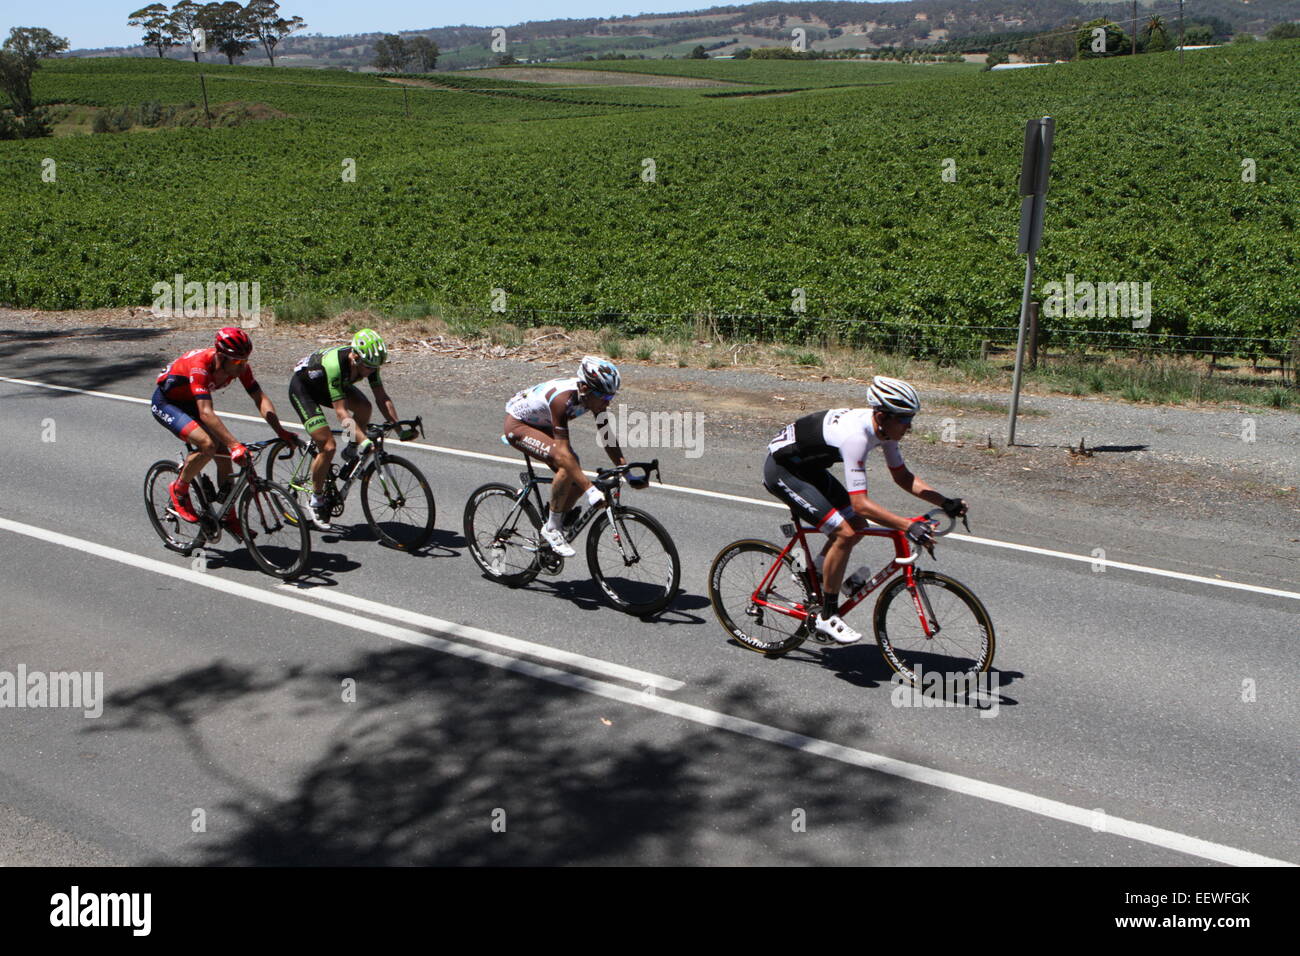 Adelaide, Australia. 22nd January, 2015. Stage 3 breakaway group of four riders, Will Clarke of Drapac Professional Racing, Lasse Norman Hansen (Cannondale-Garmin), Calvin Watson (Trek) and Axel Domont (AG2R La Mondiale) passing picturesque vineyards near Lobethal in Stage 3 of the Santos Tour Down Under on 22 January, 2015 in Adelaide, Australia. © Peter Mundy/Alamy Live News Stock Photo